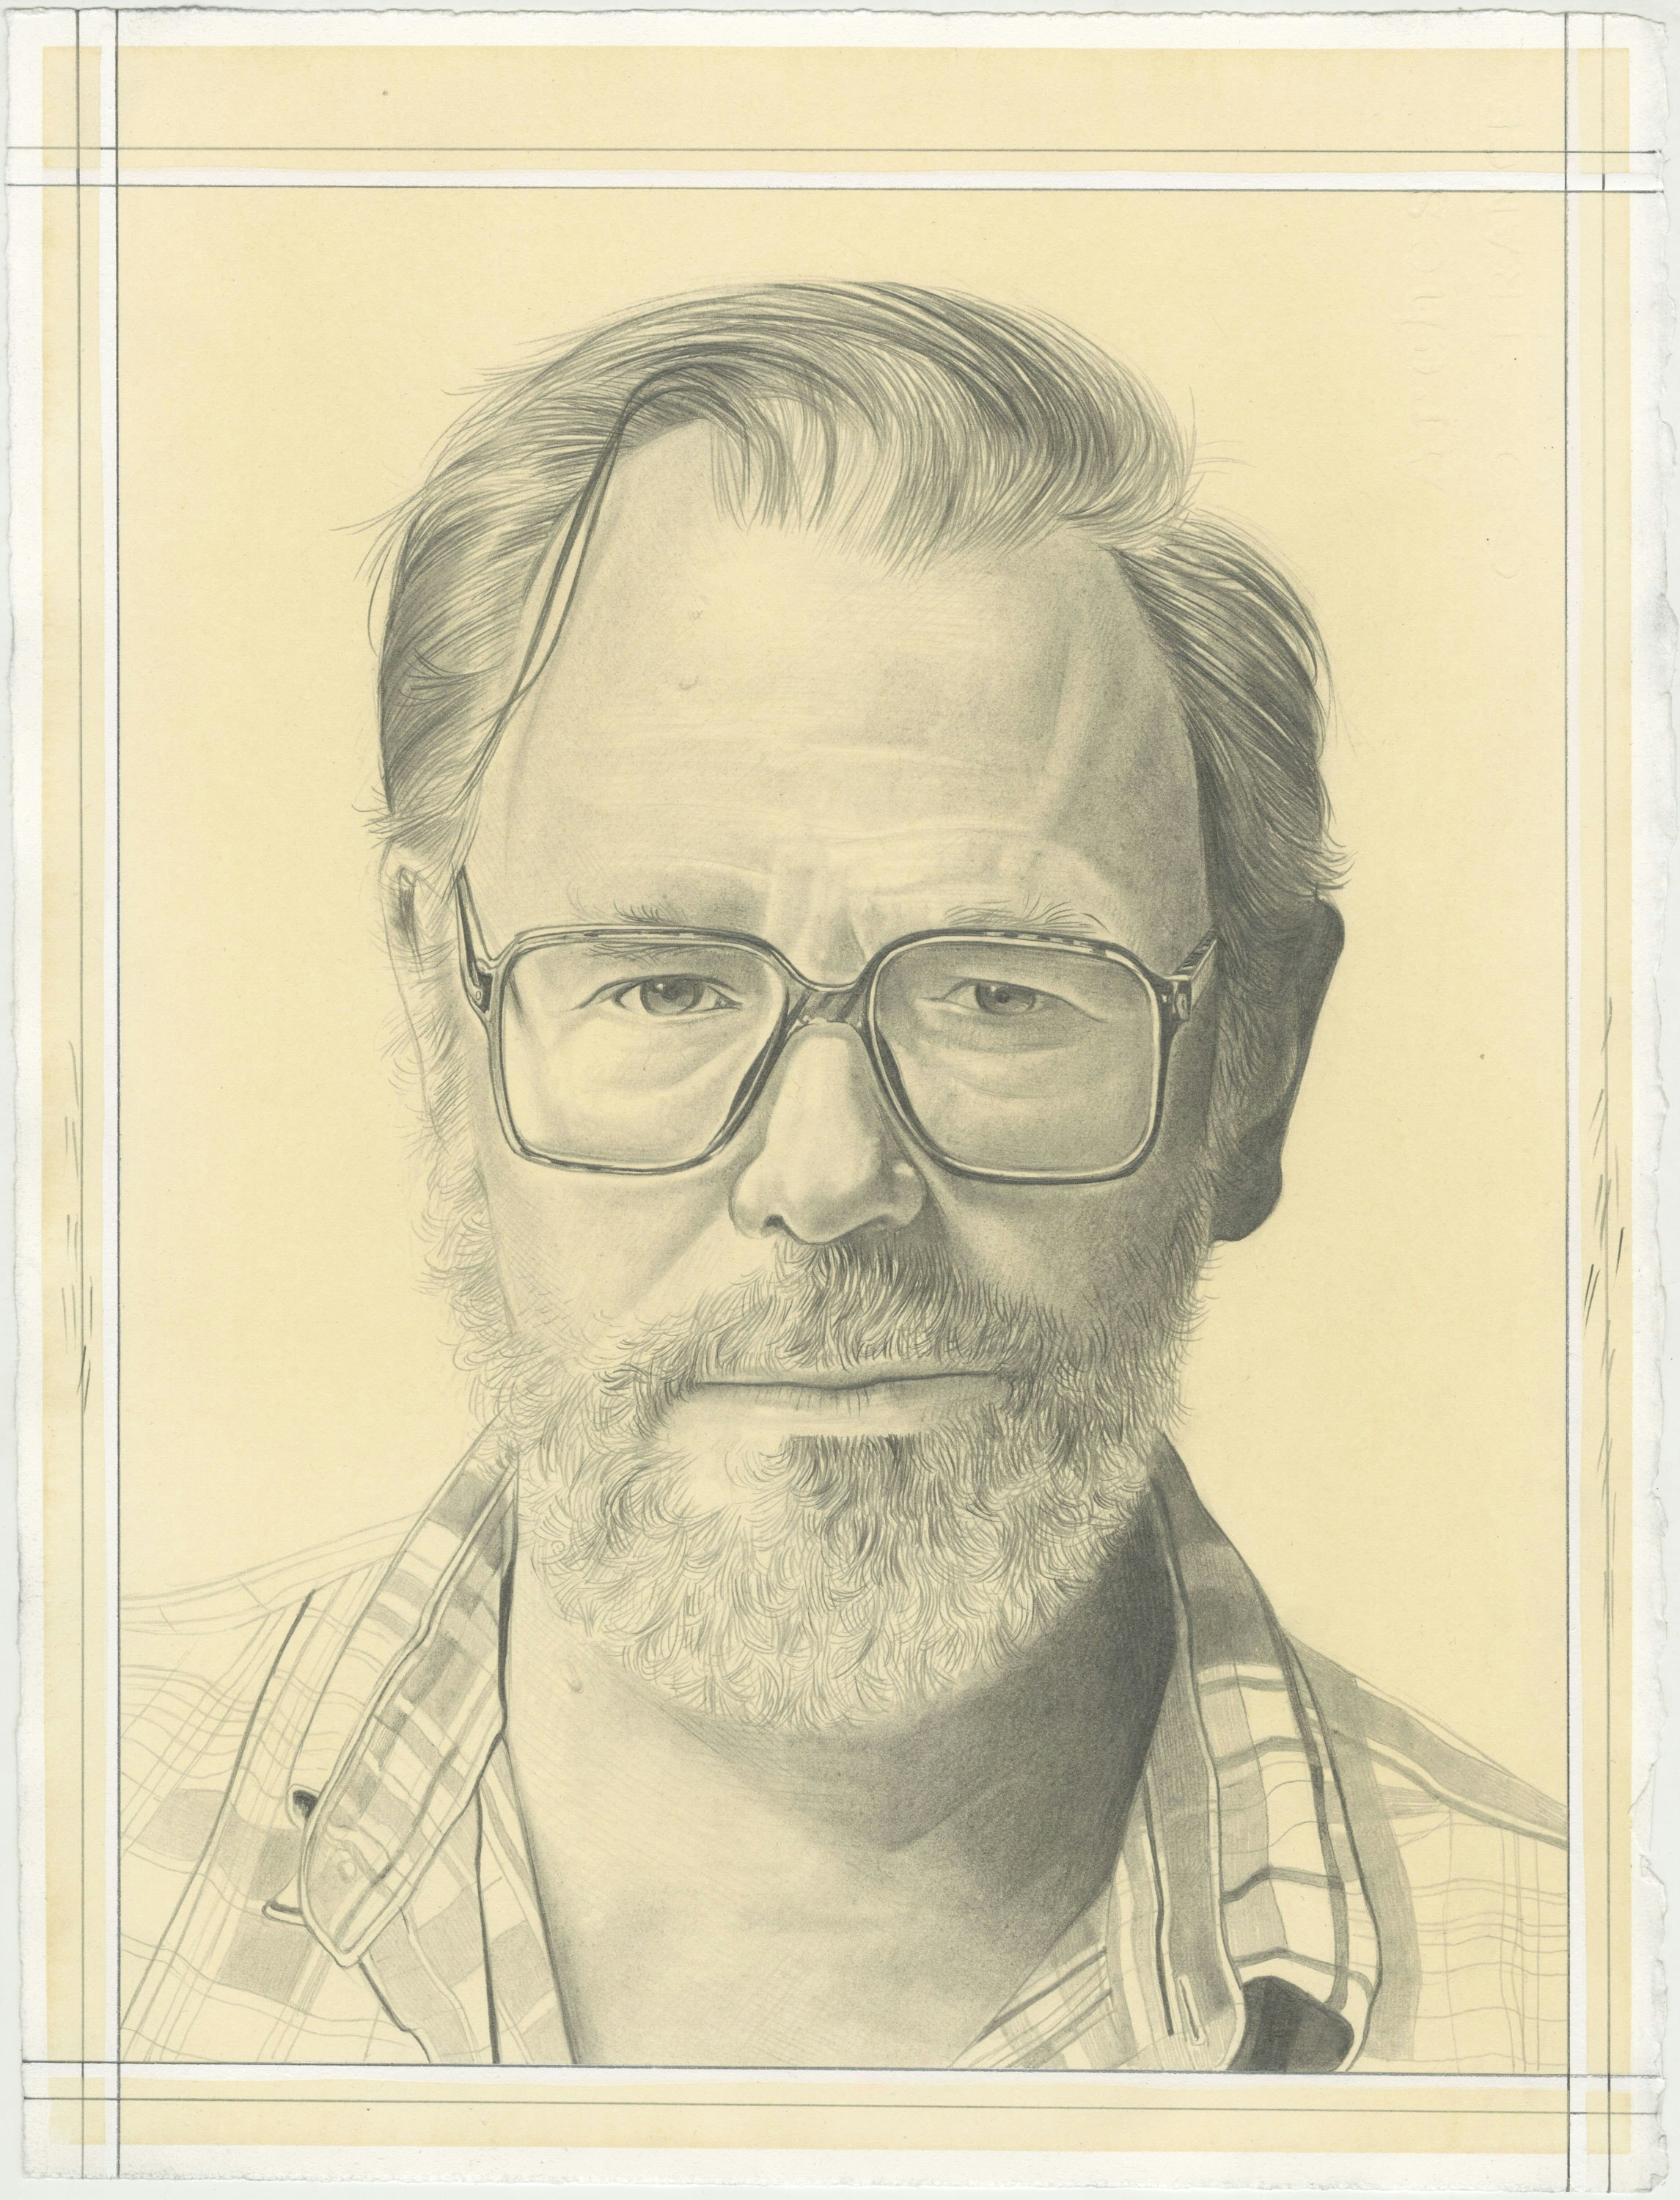 Portrait of John Currin, pencil on paper by Phong H. Bui.